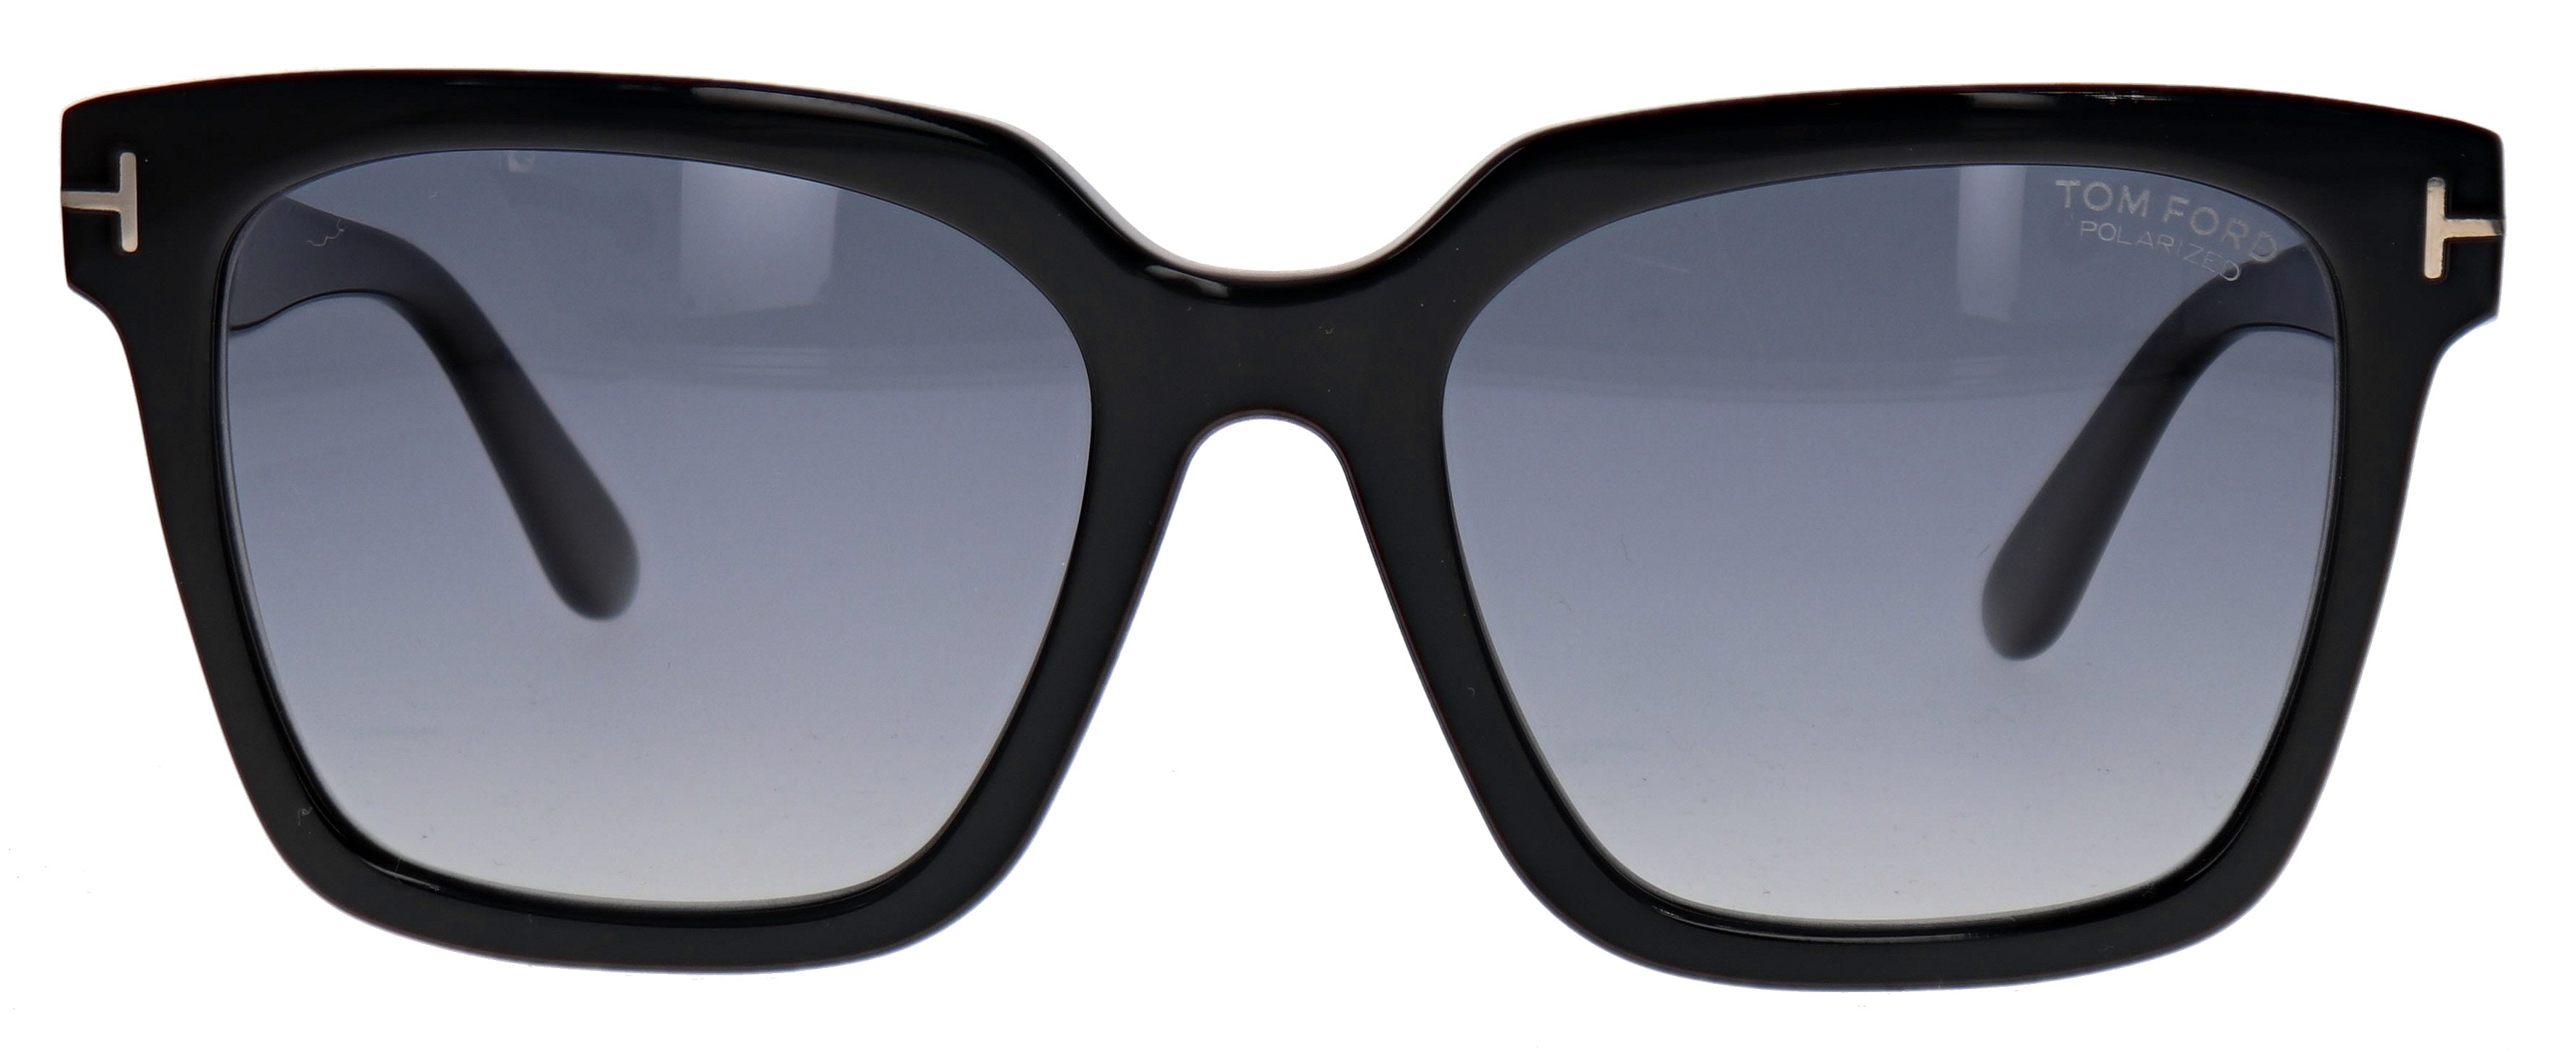 Tom Ford Selby TF952 Polarized